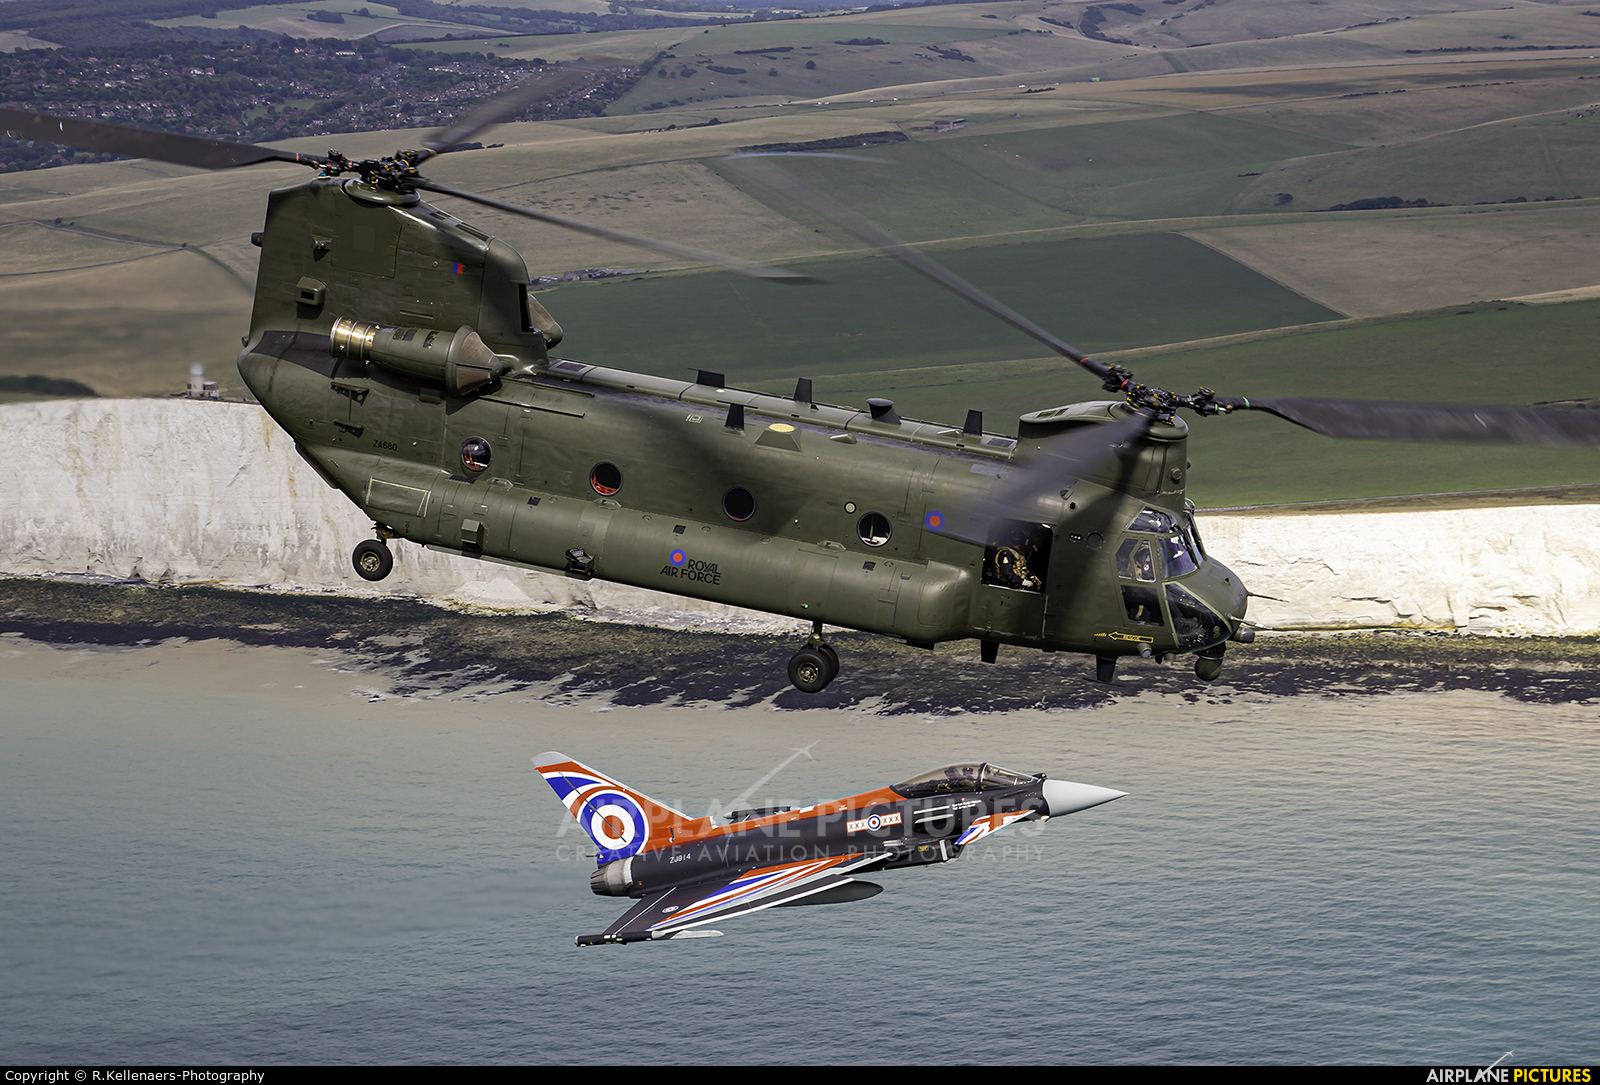 Royal Air Force ZA680 aircraft at Eastbourne - Off-Airport